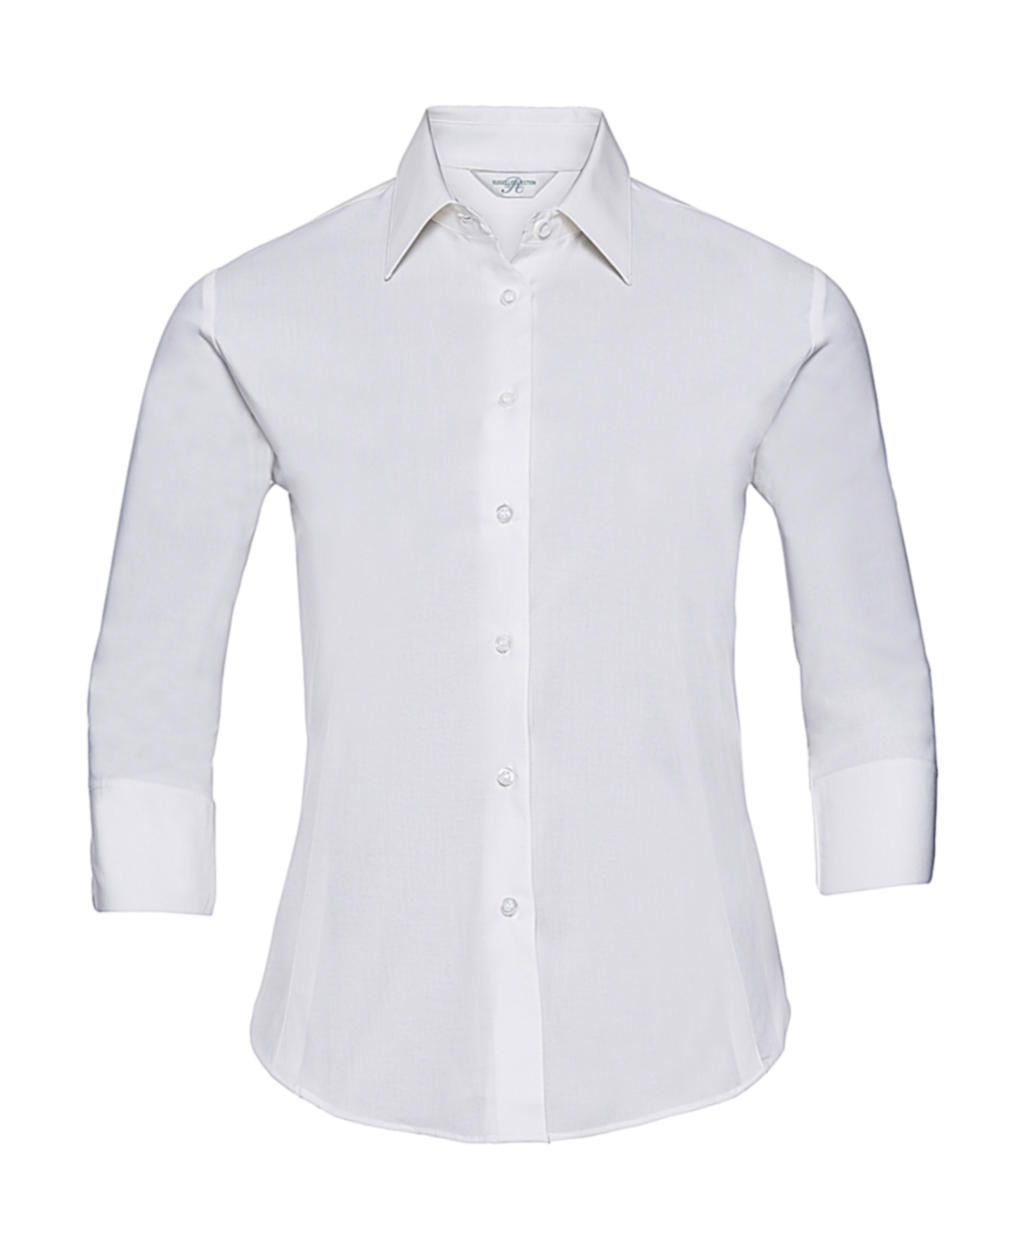  Ladies 3/4 Sleeve Easy Care Fitted Shirt in Farbe White